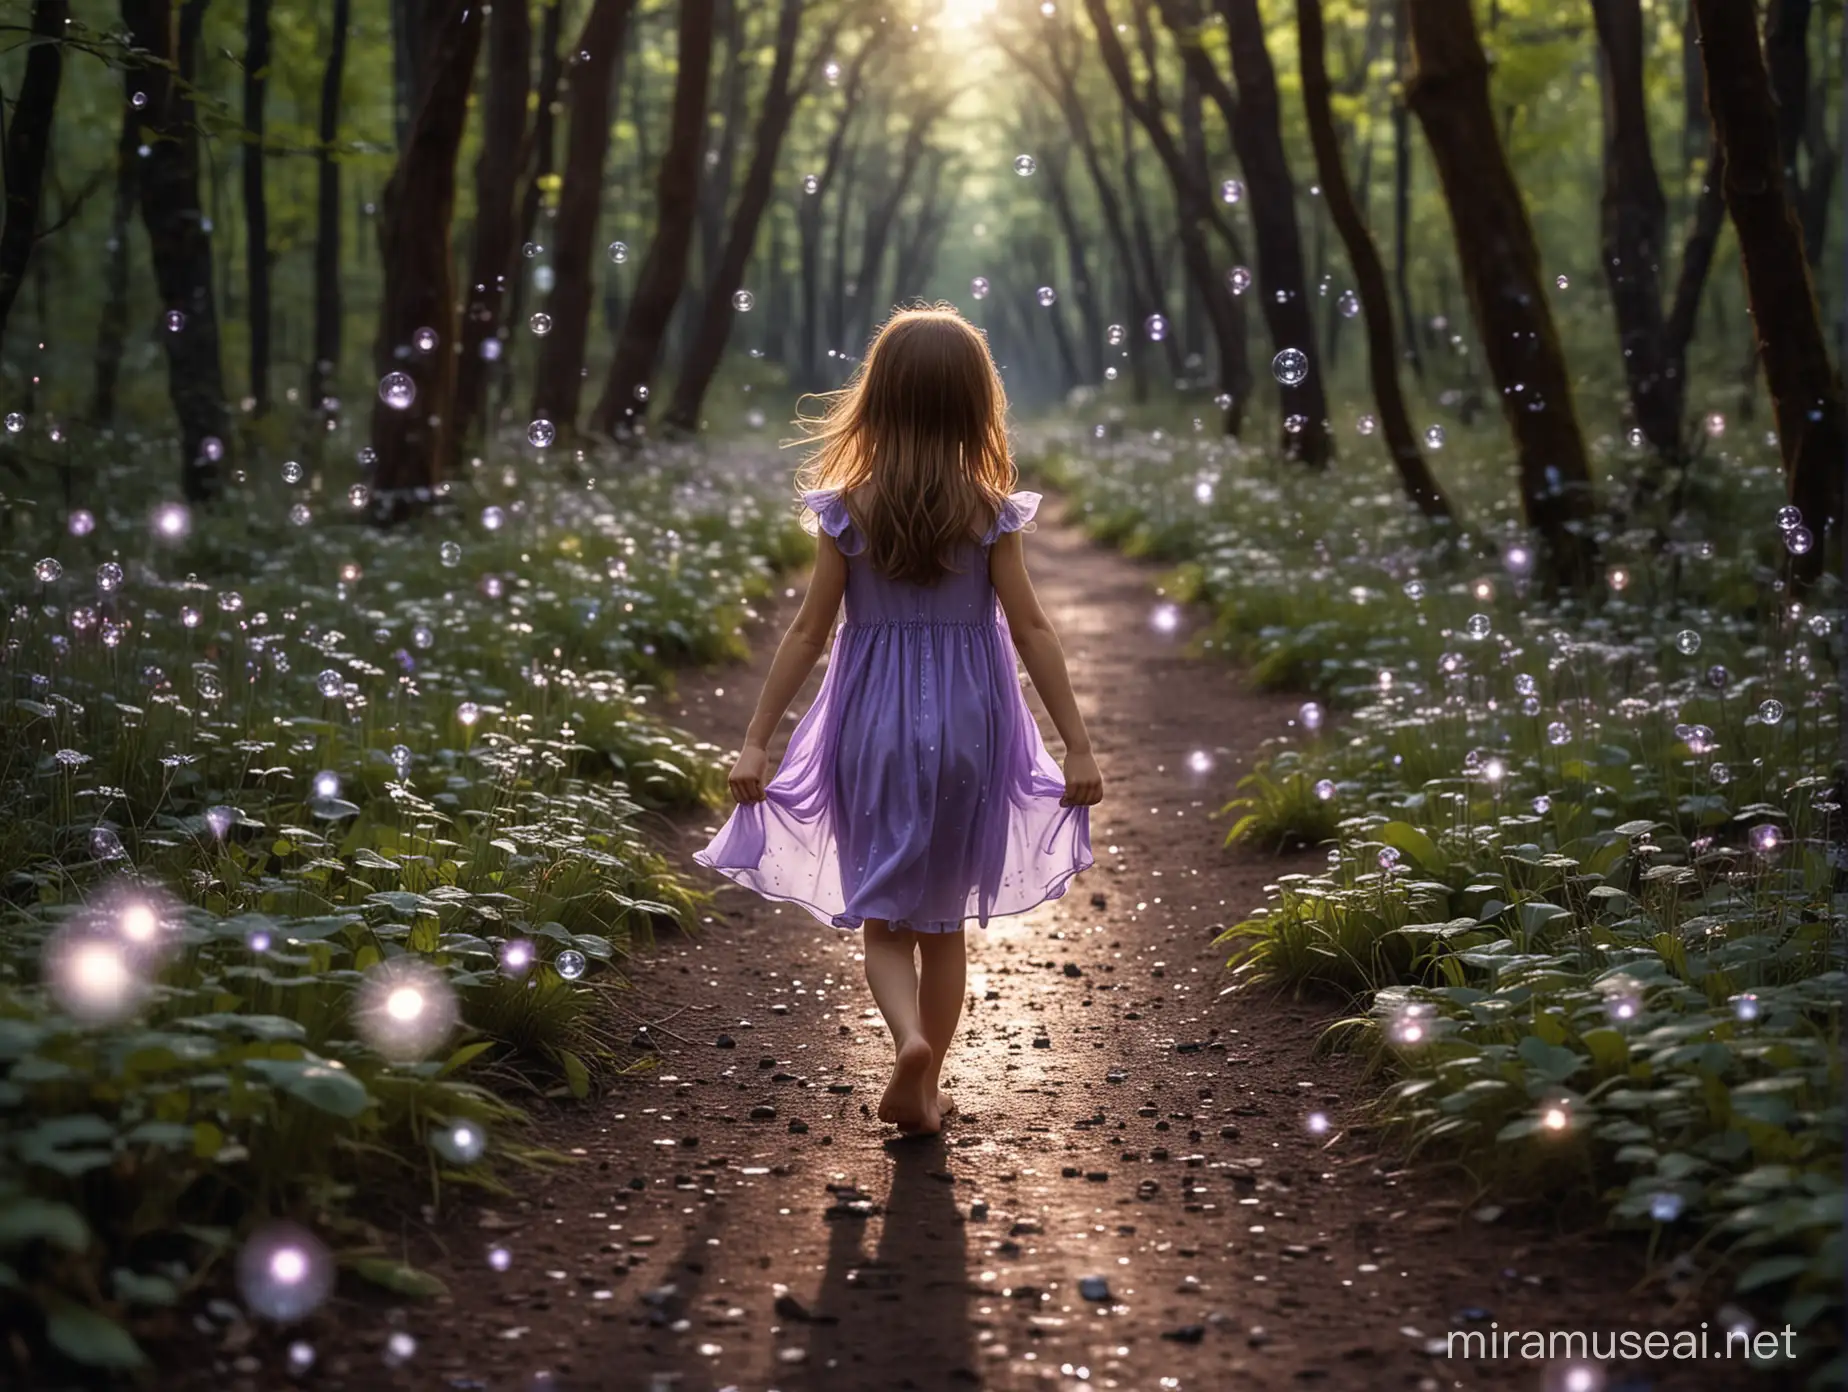 Enchanting Forest Stroll 6YearOld Girl in Purple Dress with Fairies